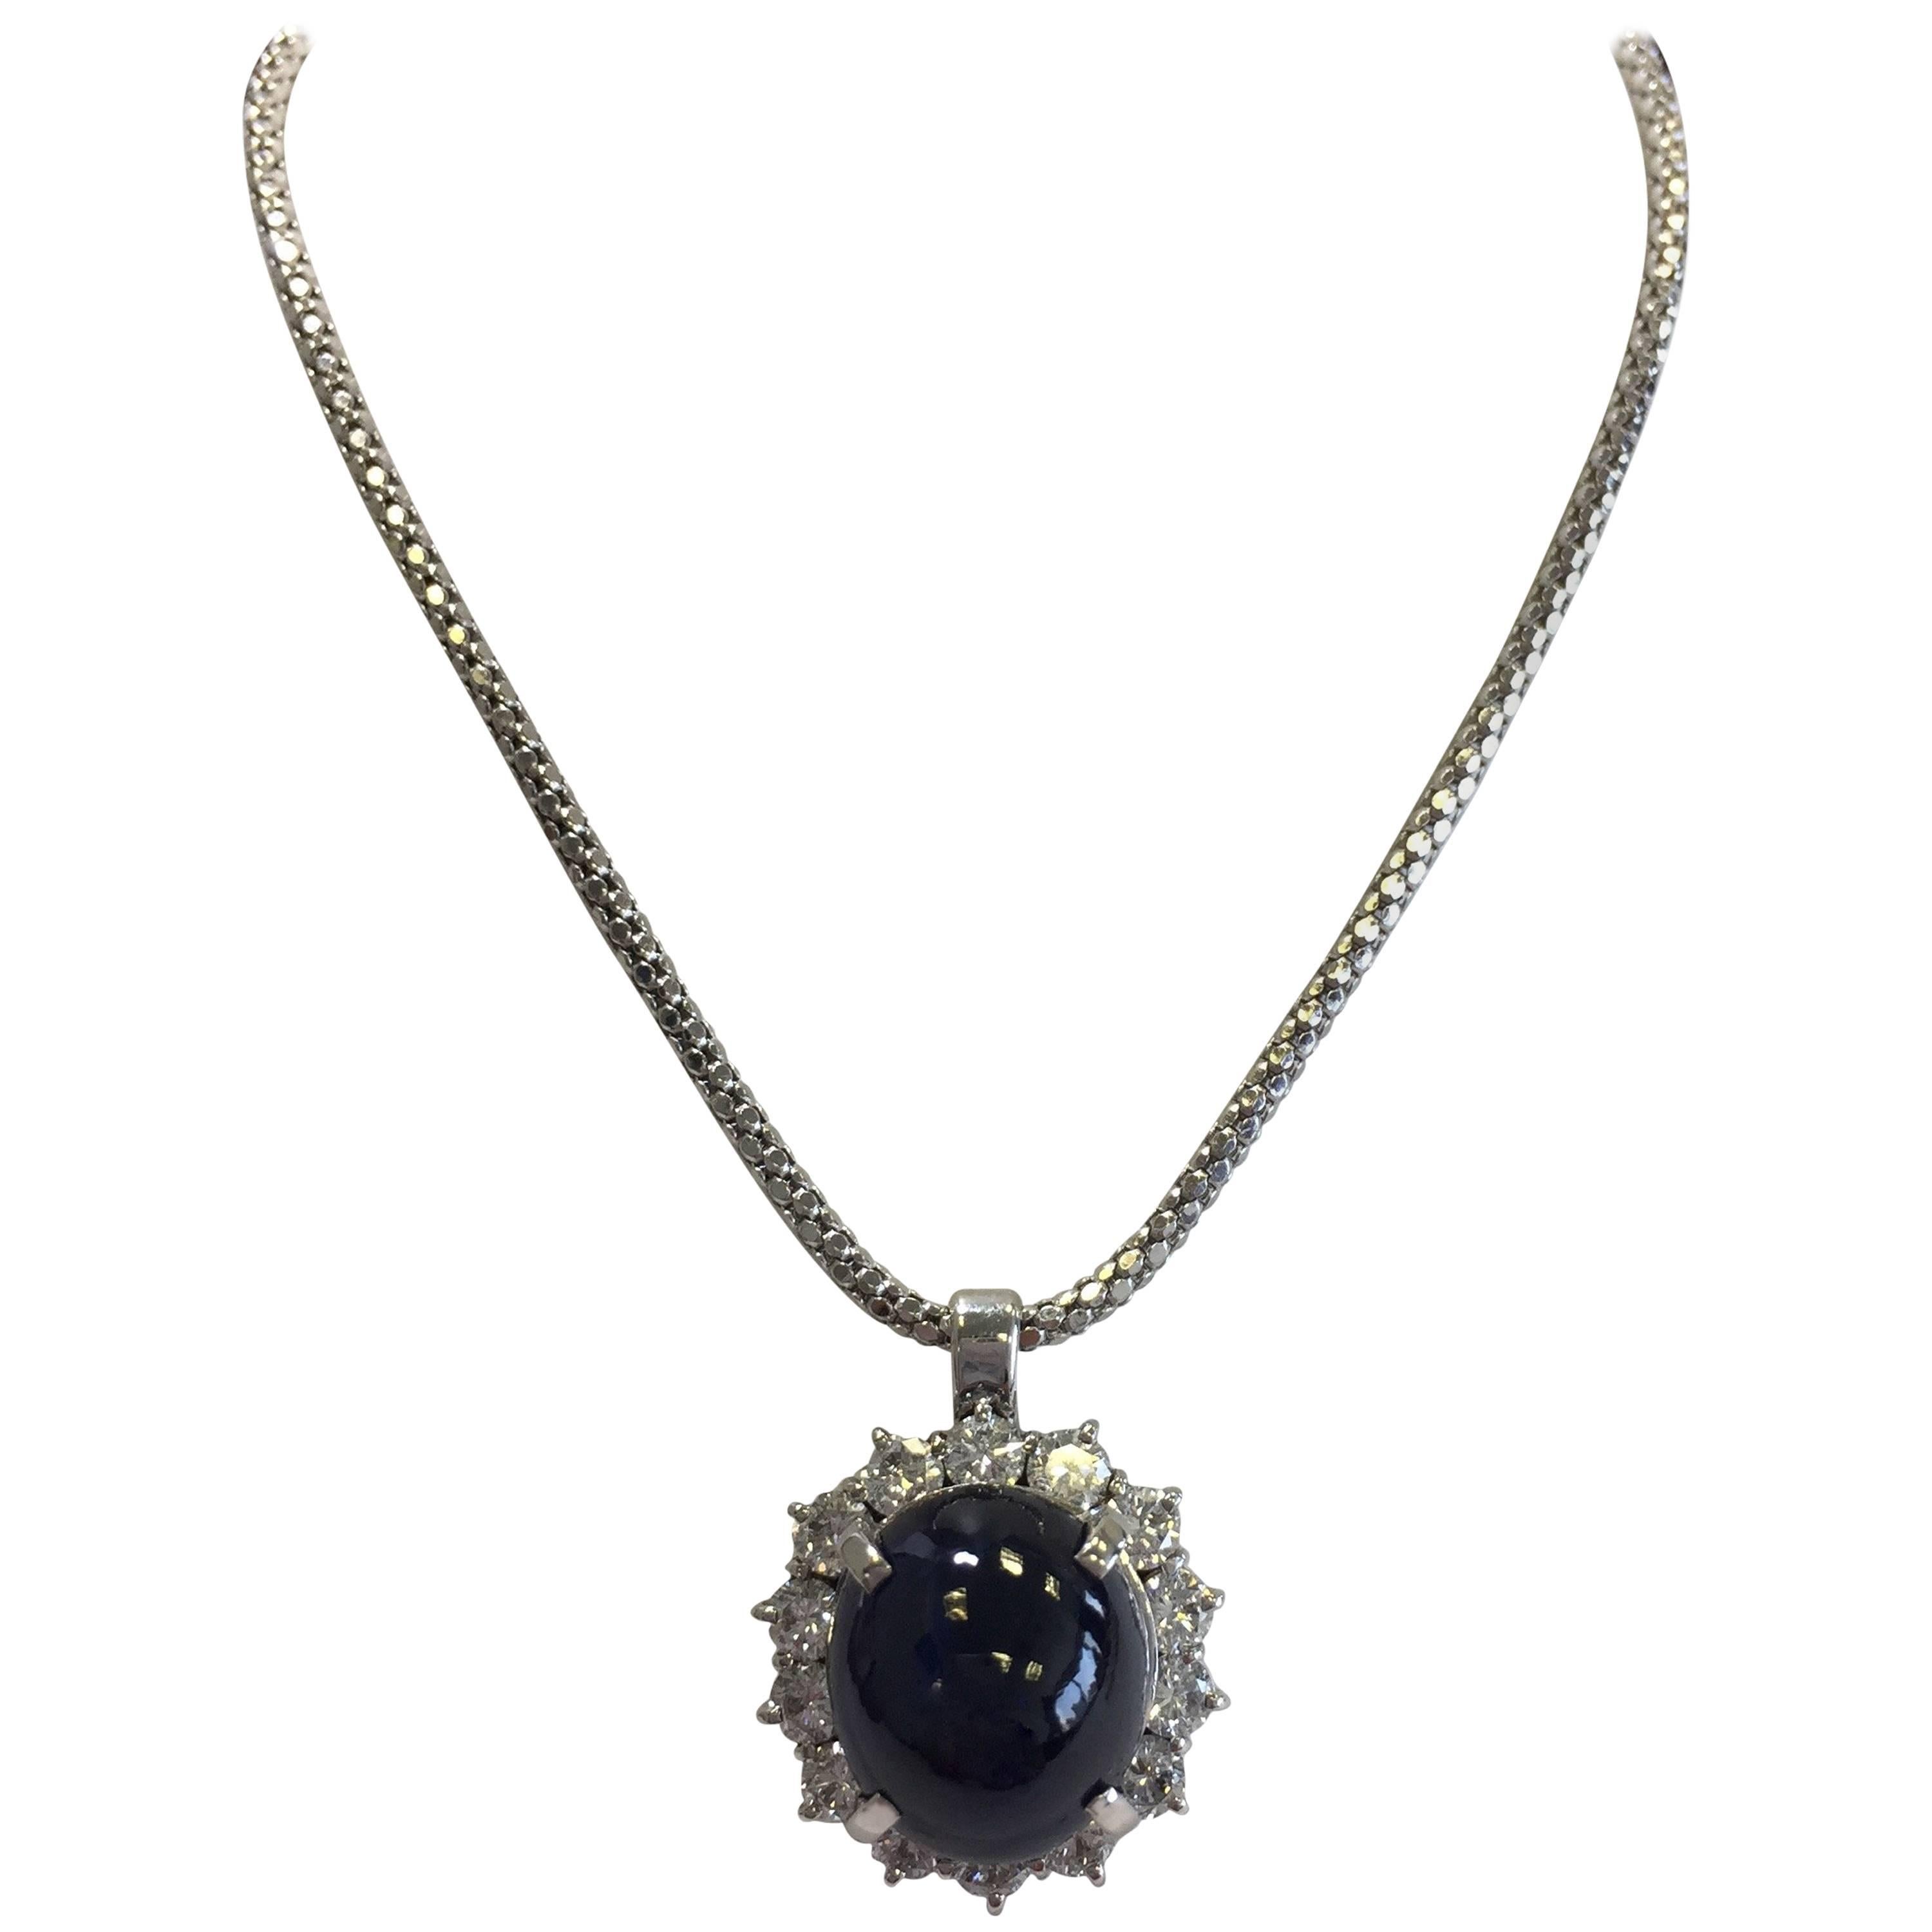  Blue Sapphire Oval Cabochon and Diamond Necklace in 18 Karat White Gold